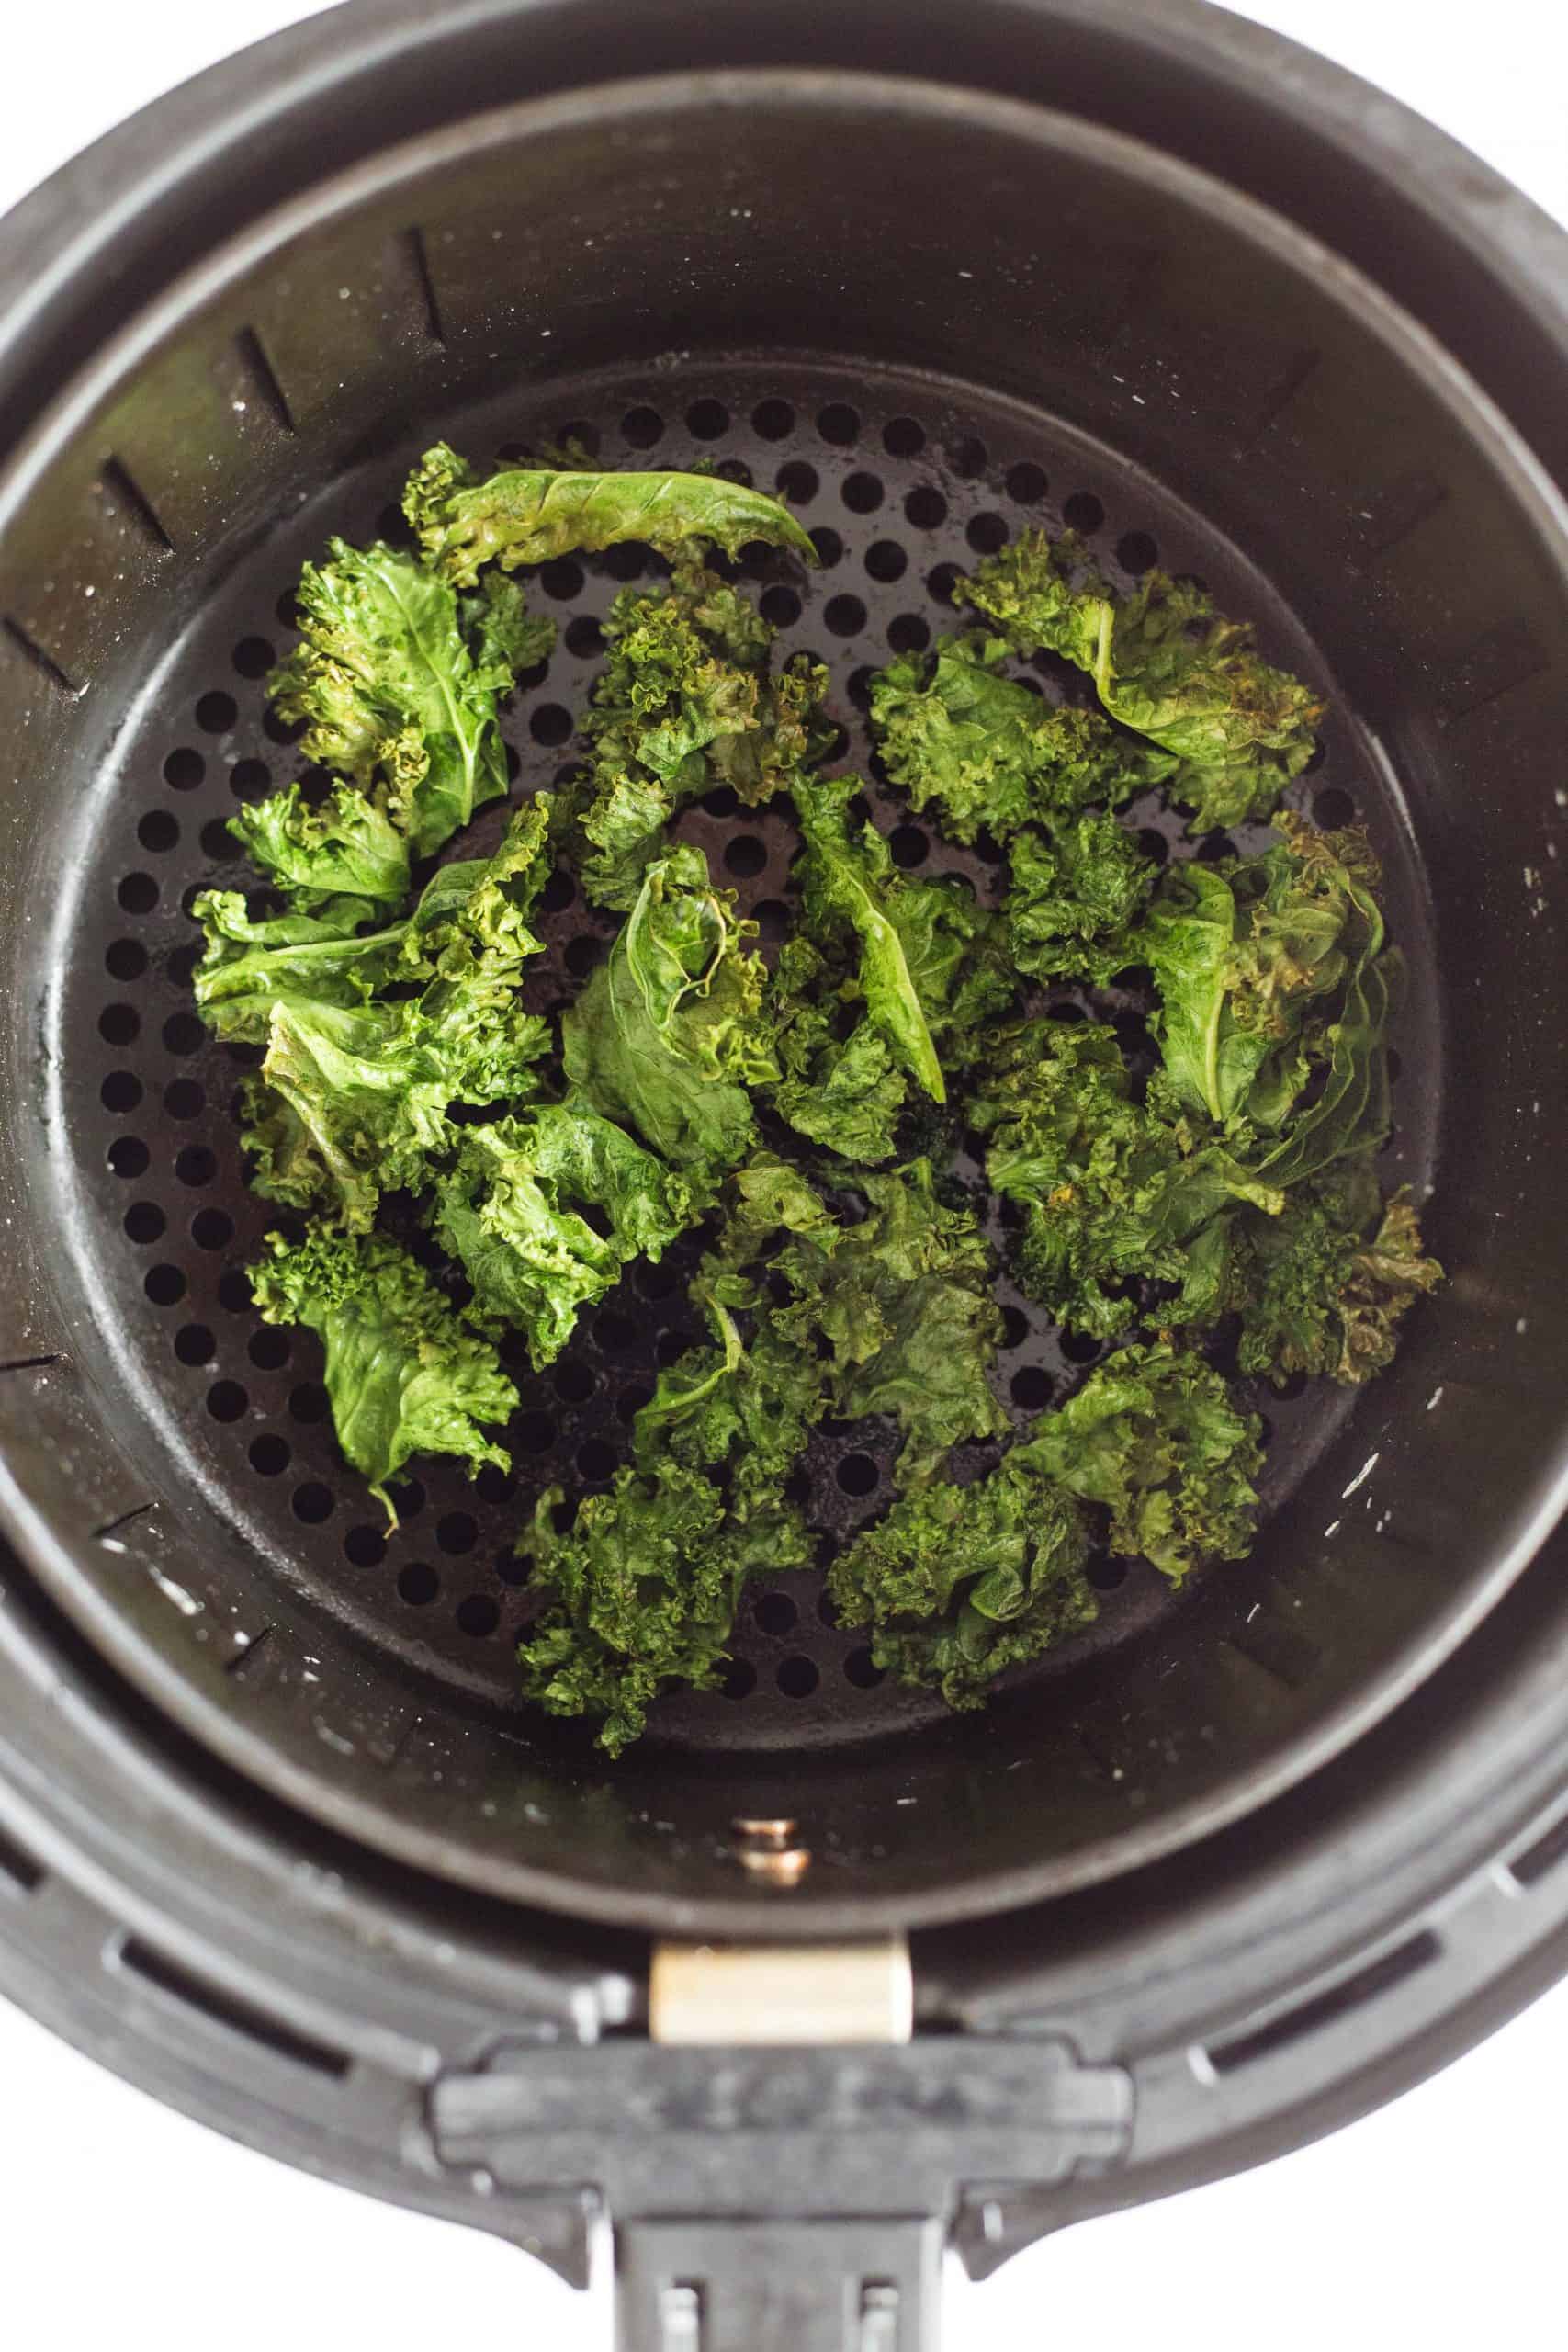 Air fried kale chips in the air fryer basket.